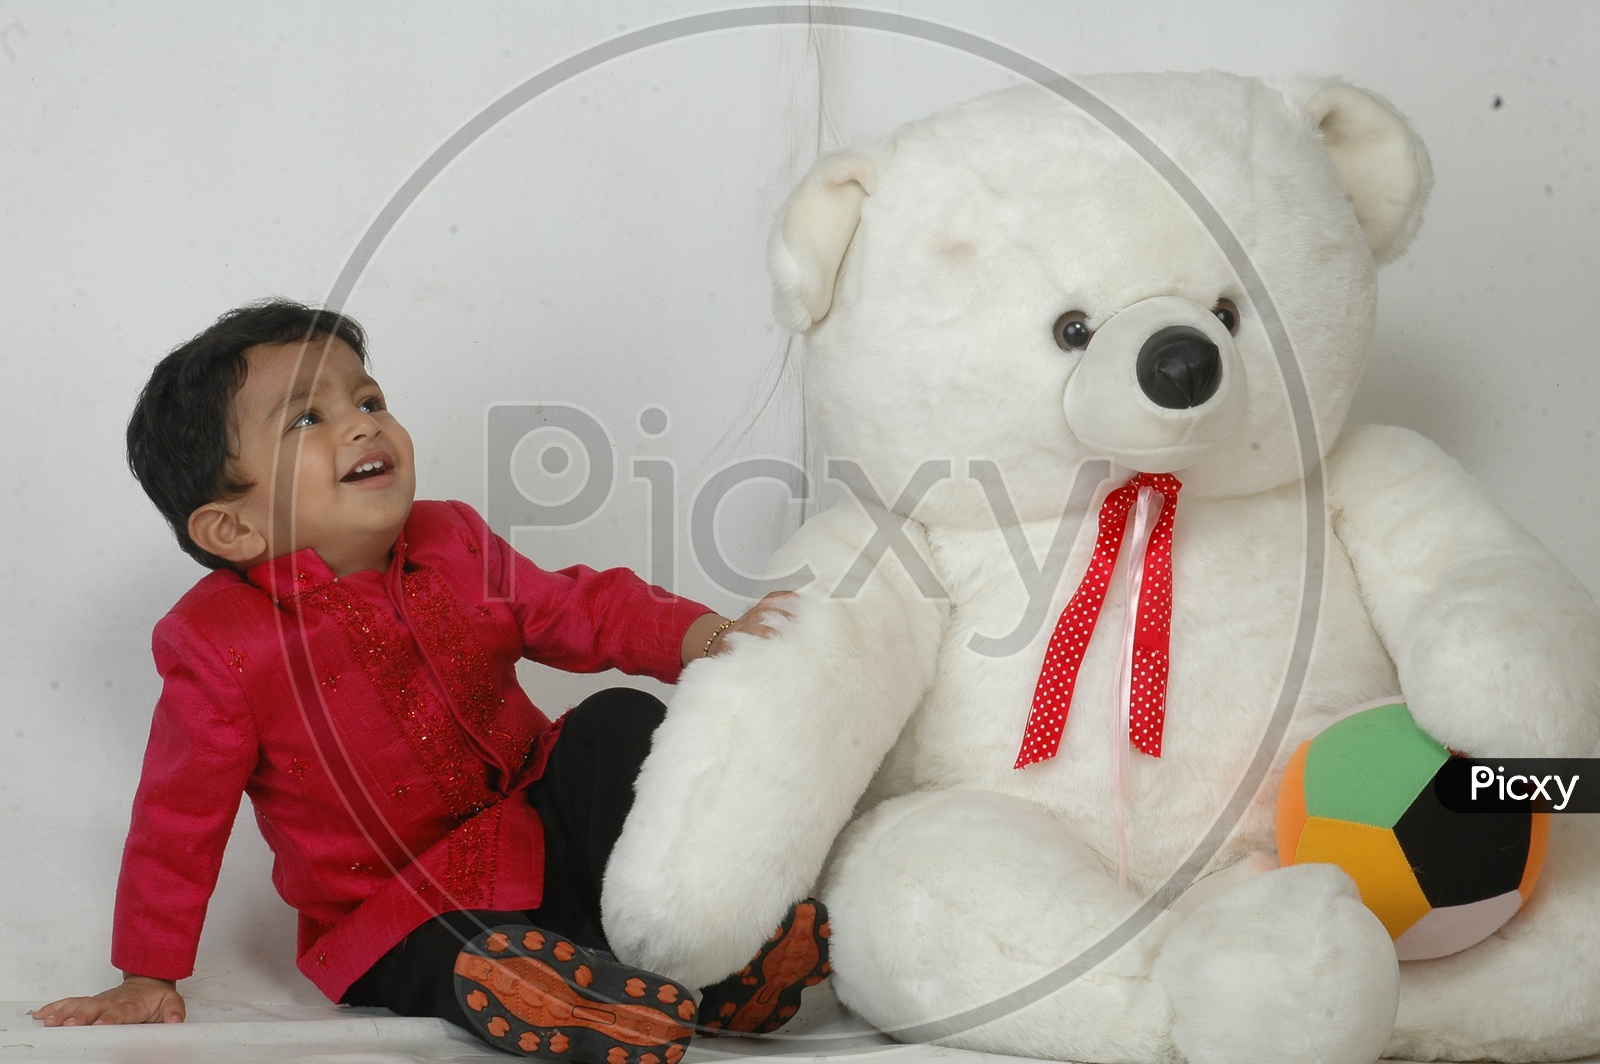 Indian Baby Boy Playing With a Teddy Bear Doll  Closeup Shot With Expressions On an Isolated White Background